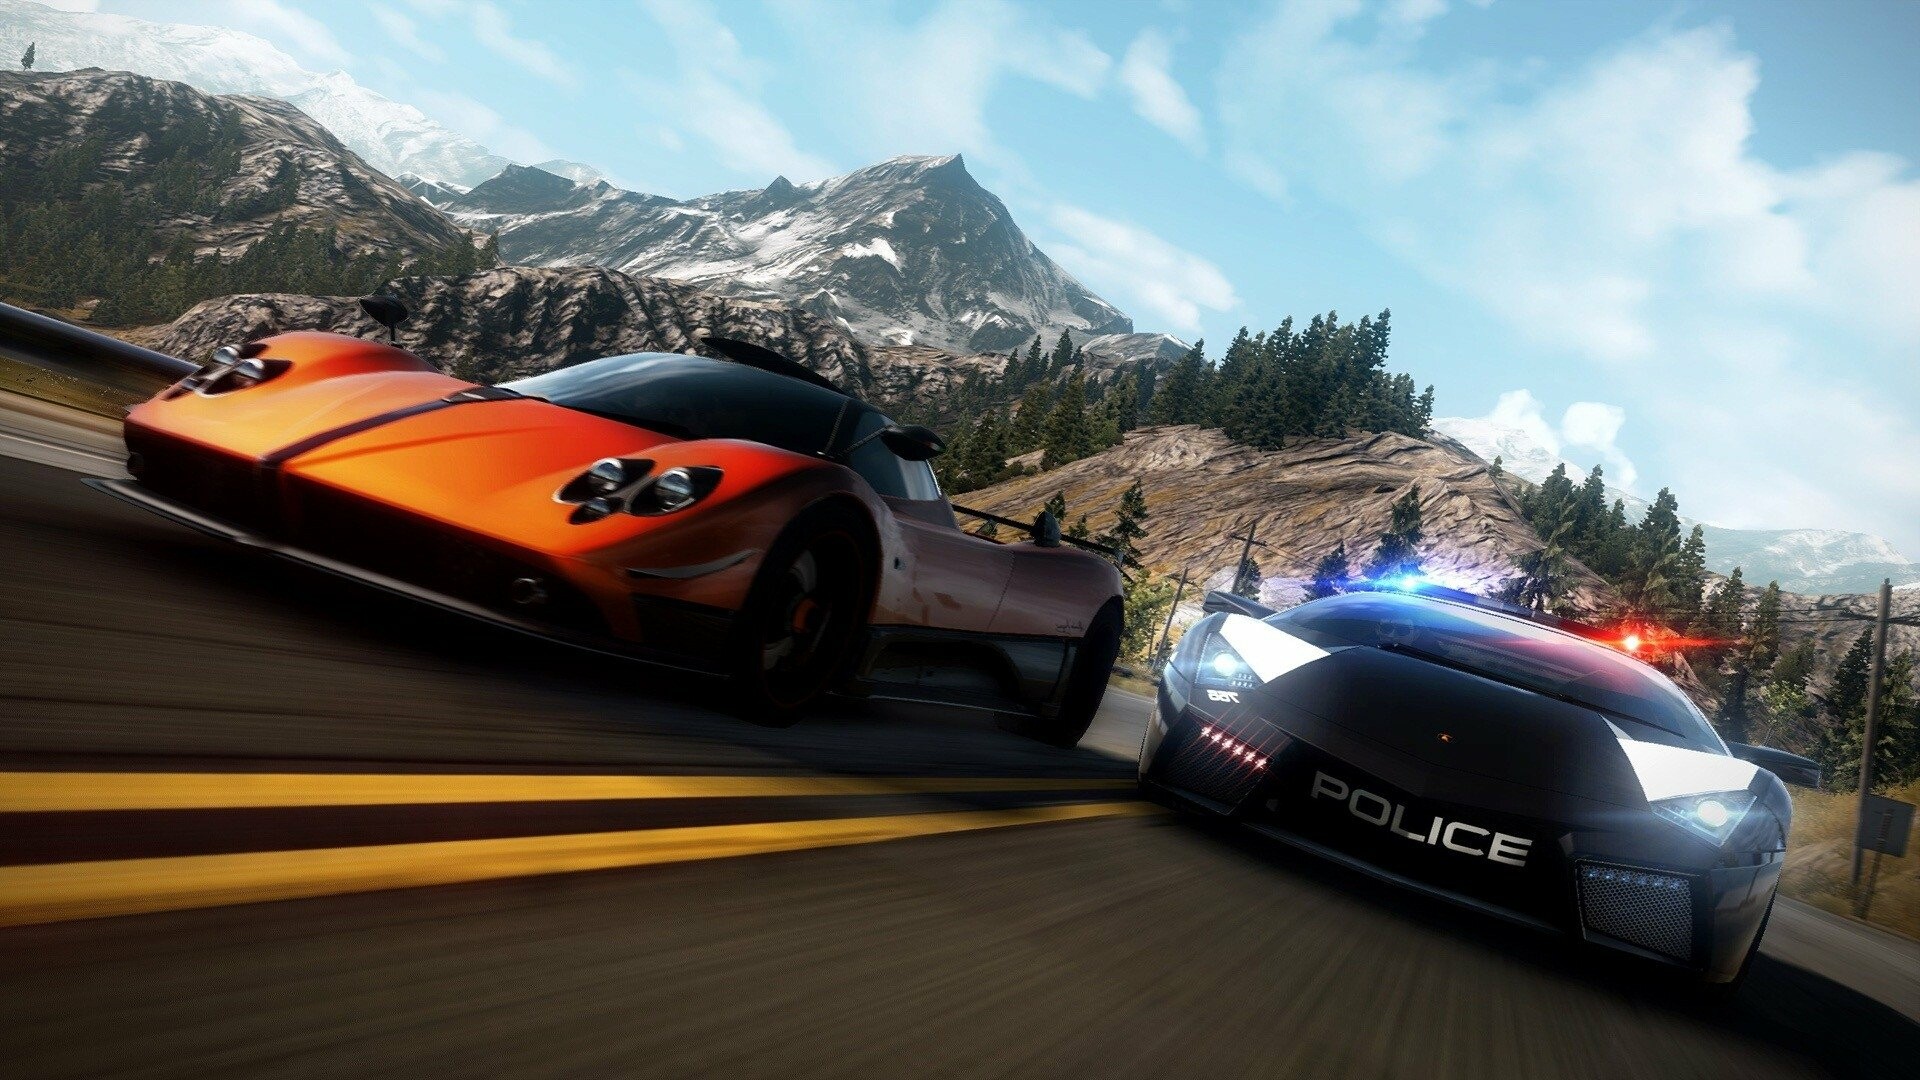 Need for Speed Hot Pursuit Remastered: The game features a range of licensed vehicles, including Pagani Zonda and Lamborghini Gallardo. 1920x1080 Full HD Wallpaper.